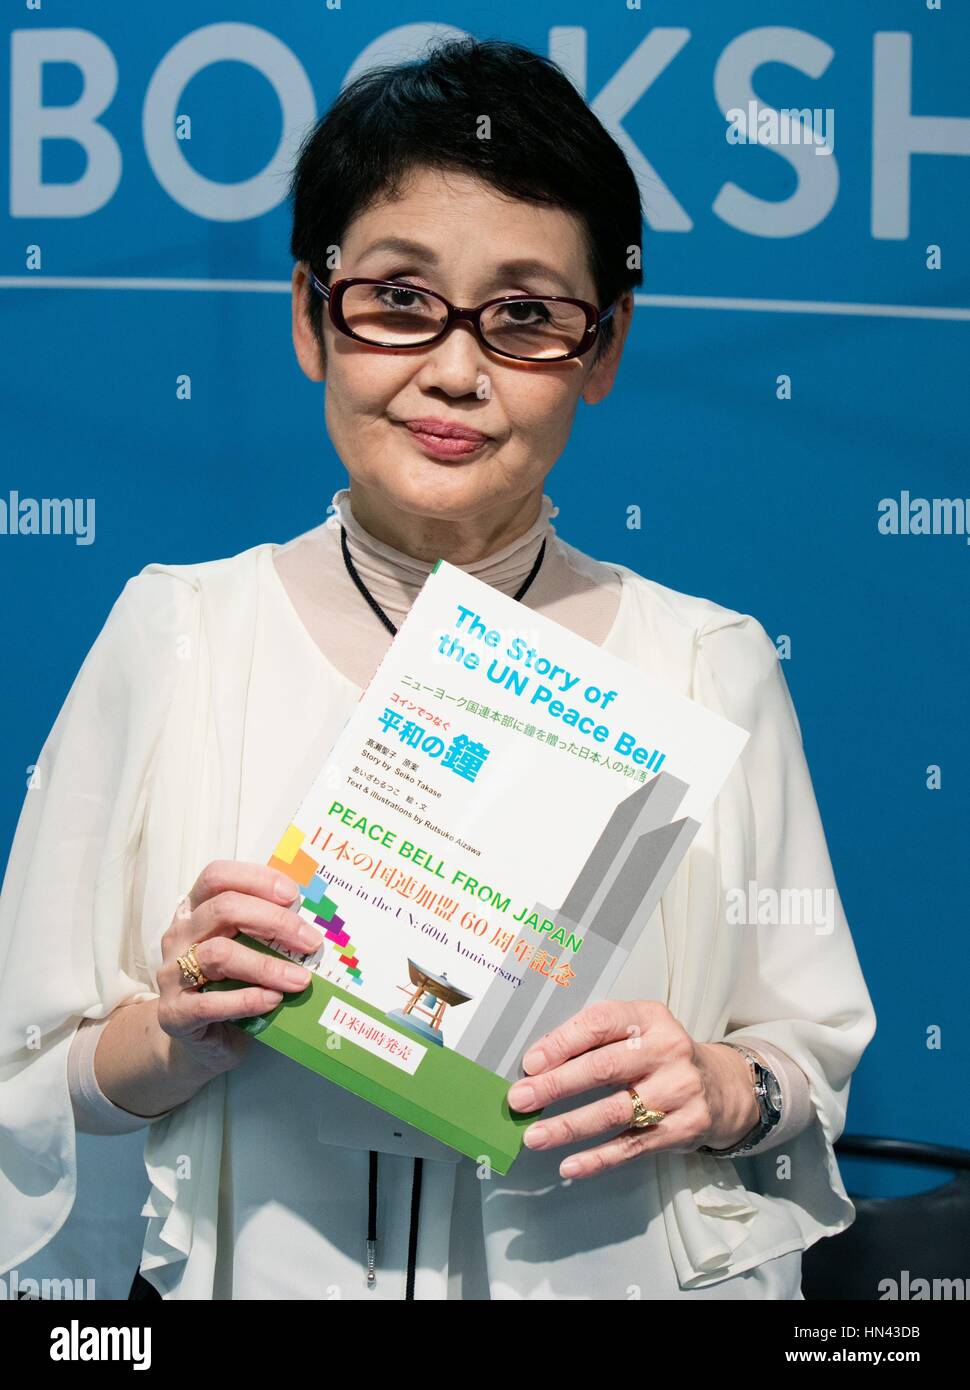 United Nations, New York, USA, September 16 2016 - Book Signing by Seiko Takase author of The Story of the UN Peace Bell today at the UN Headquarters in New York. Photo: Luiz Rampelotto/EuropaNewswire | usage worldwide Stock Photo